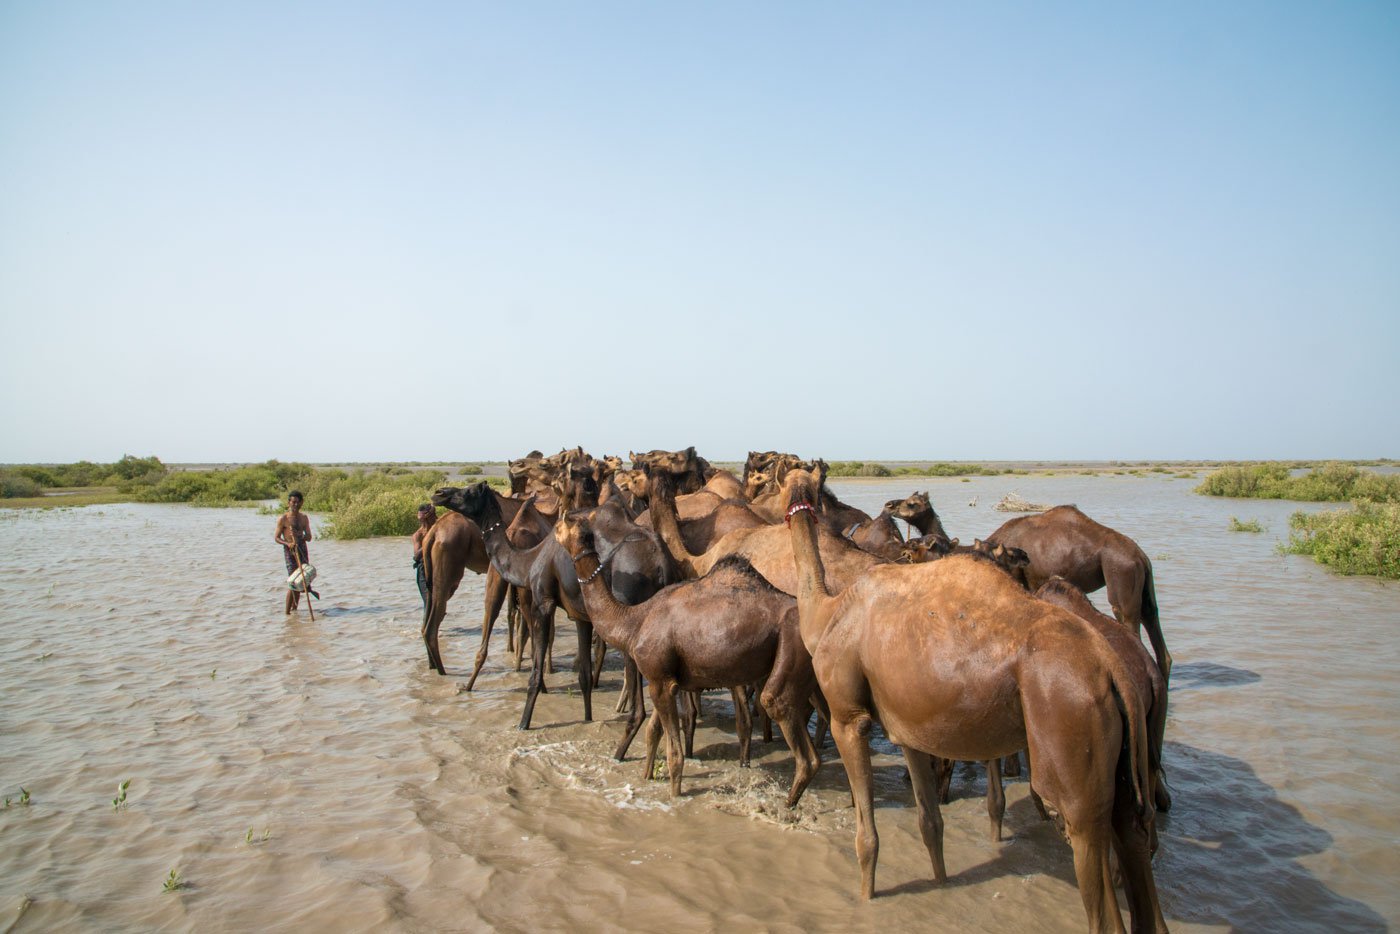 The camels’ movement in the area and their feeding on plants help the mangroves regenerate